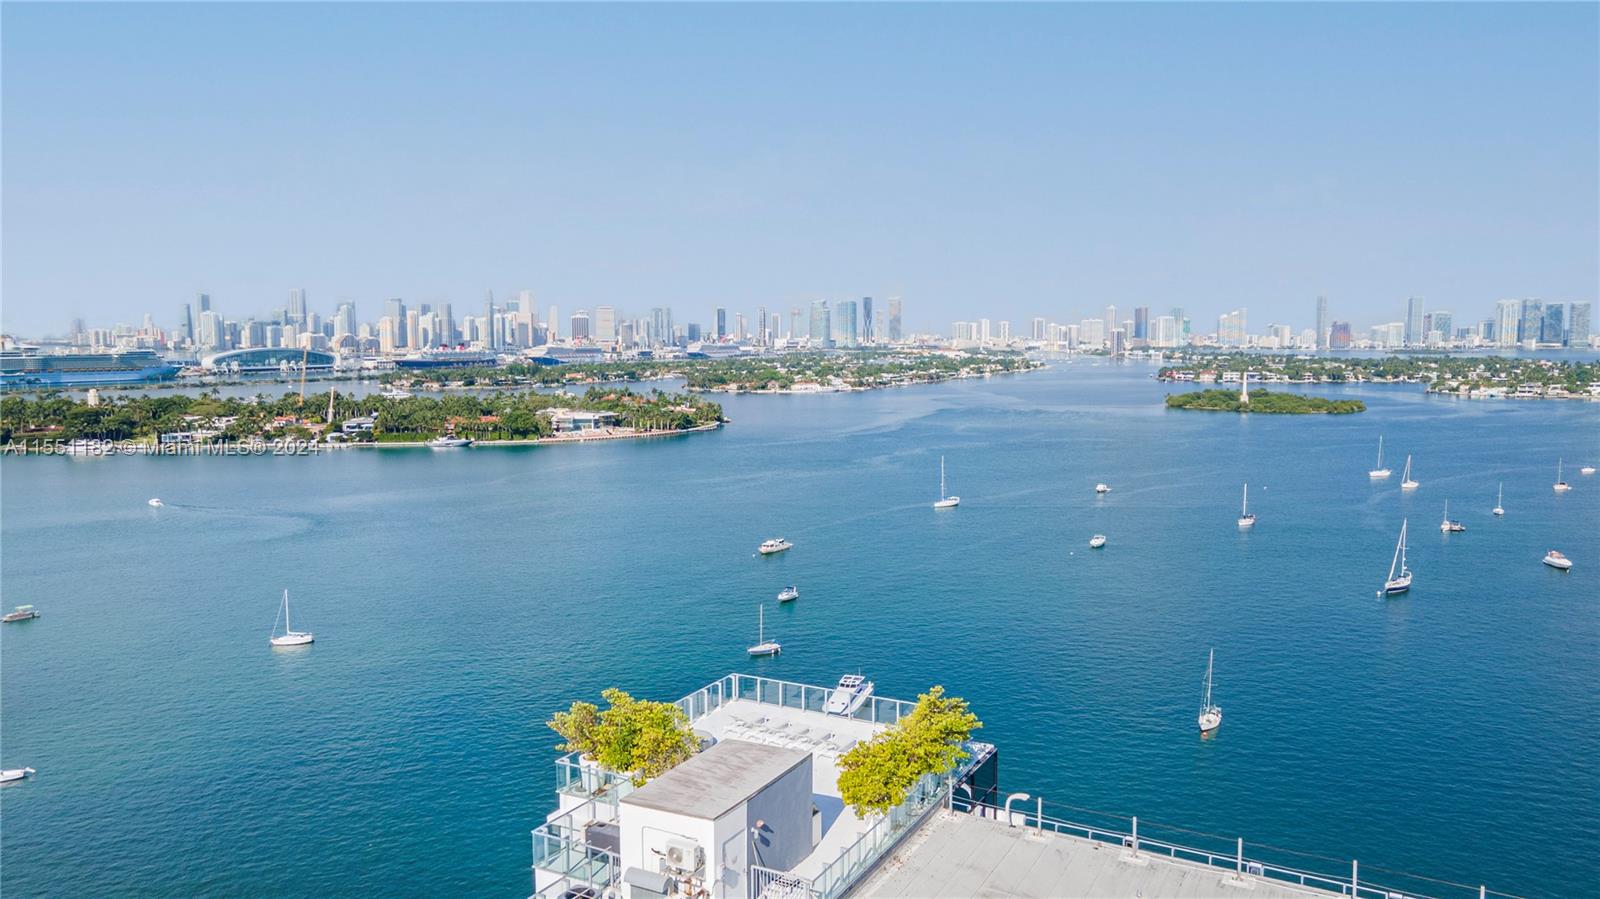 AUCTION BIDDING OPEN: Bidding ends April 30th. Previously Listed $3.12M. Current High Bid $1.05M. No Reserve. Showings Daily By Appt. Experience the stunning sunsets over Biscayne Bay from your private terrace at the Tower Suite at the Mondrian South Beach.You're in the heart of South Beach,where the contemporary design with white and neutral colors delivers a stunning yet tranquil space.The open-concept living space expands to the gleaming kitchen fully equipped w/stainless steel appliances, sophisticated cabinetry & breakfast bar.Large windows in the bedrooms w/water views keep the bright and airy feel, enveloping you in light and luxury.View the panoramic Miami skyline from your private rooftop or catch the sunset from the pool, complete with cabanas and poolside resort lounging.